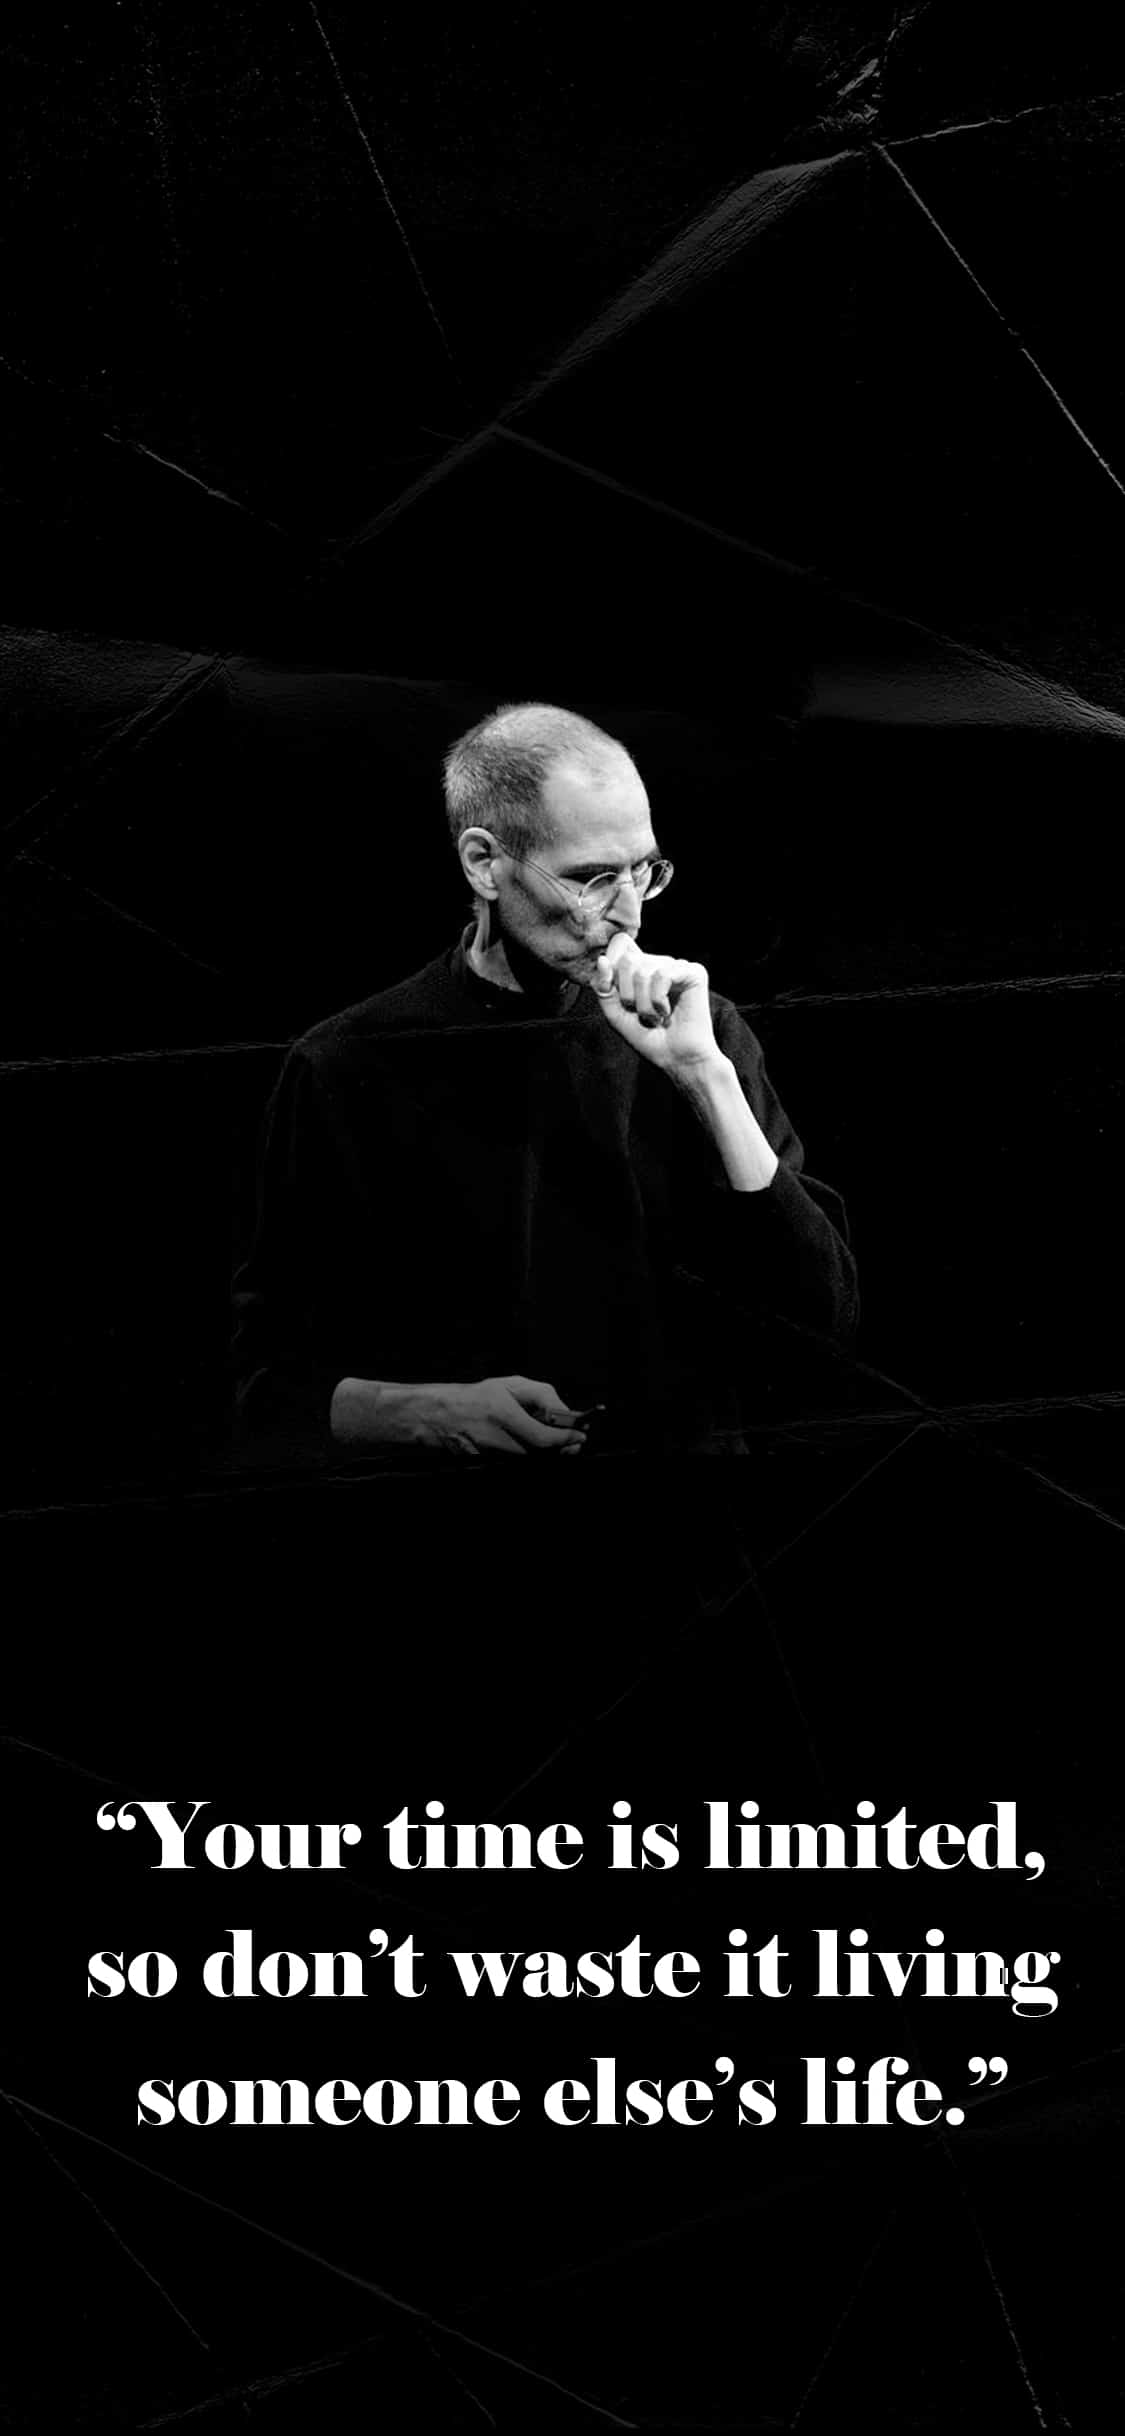 Steve Jobs quotes on life and work